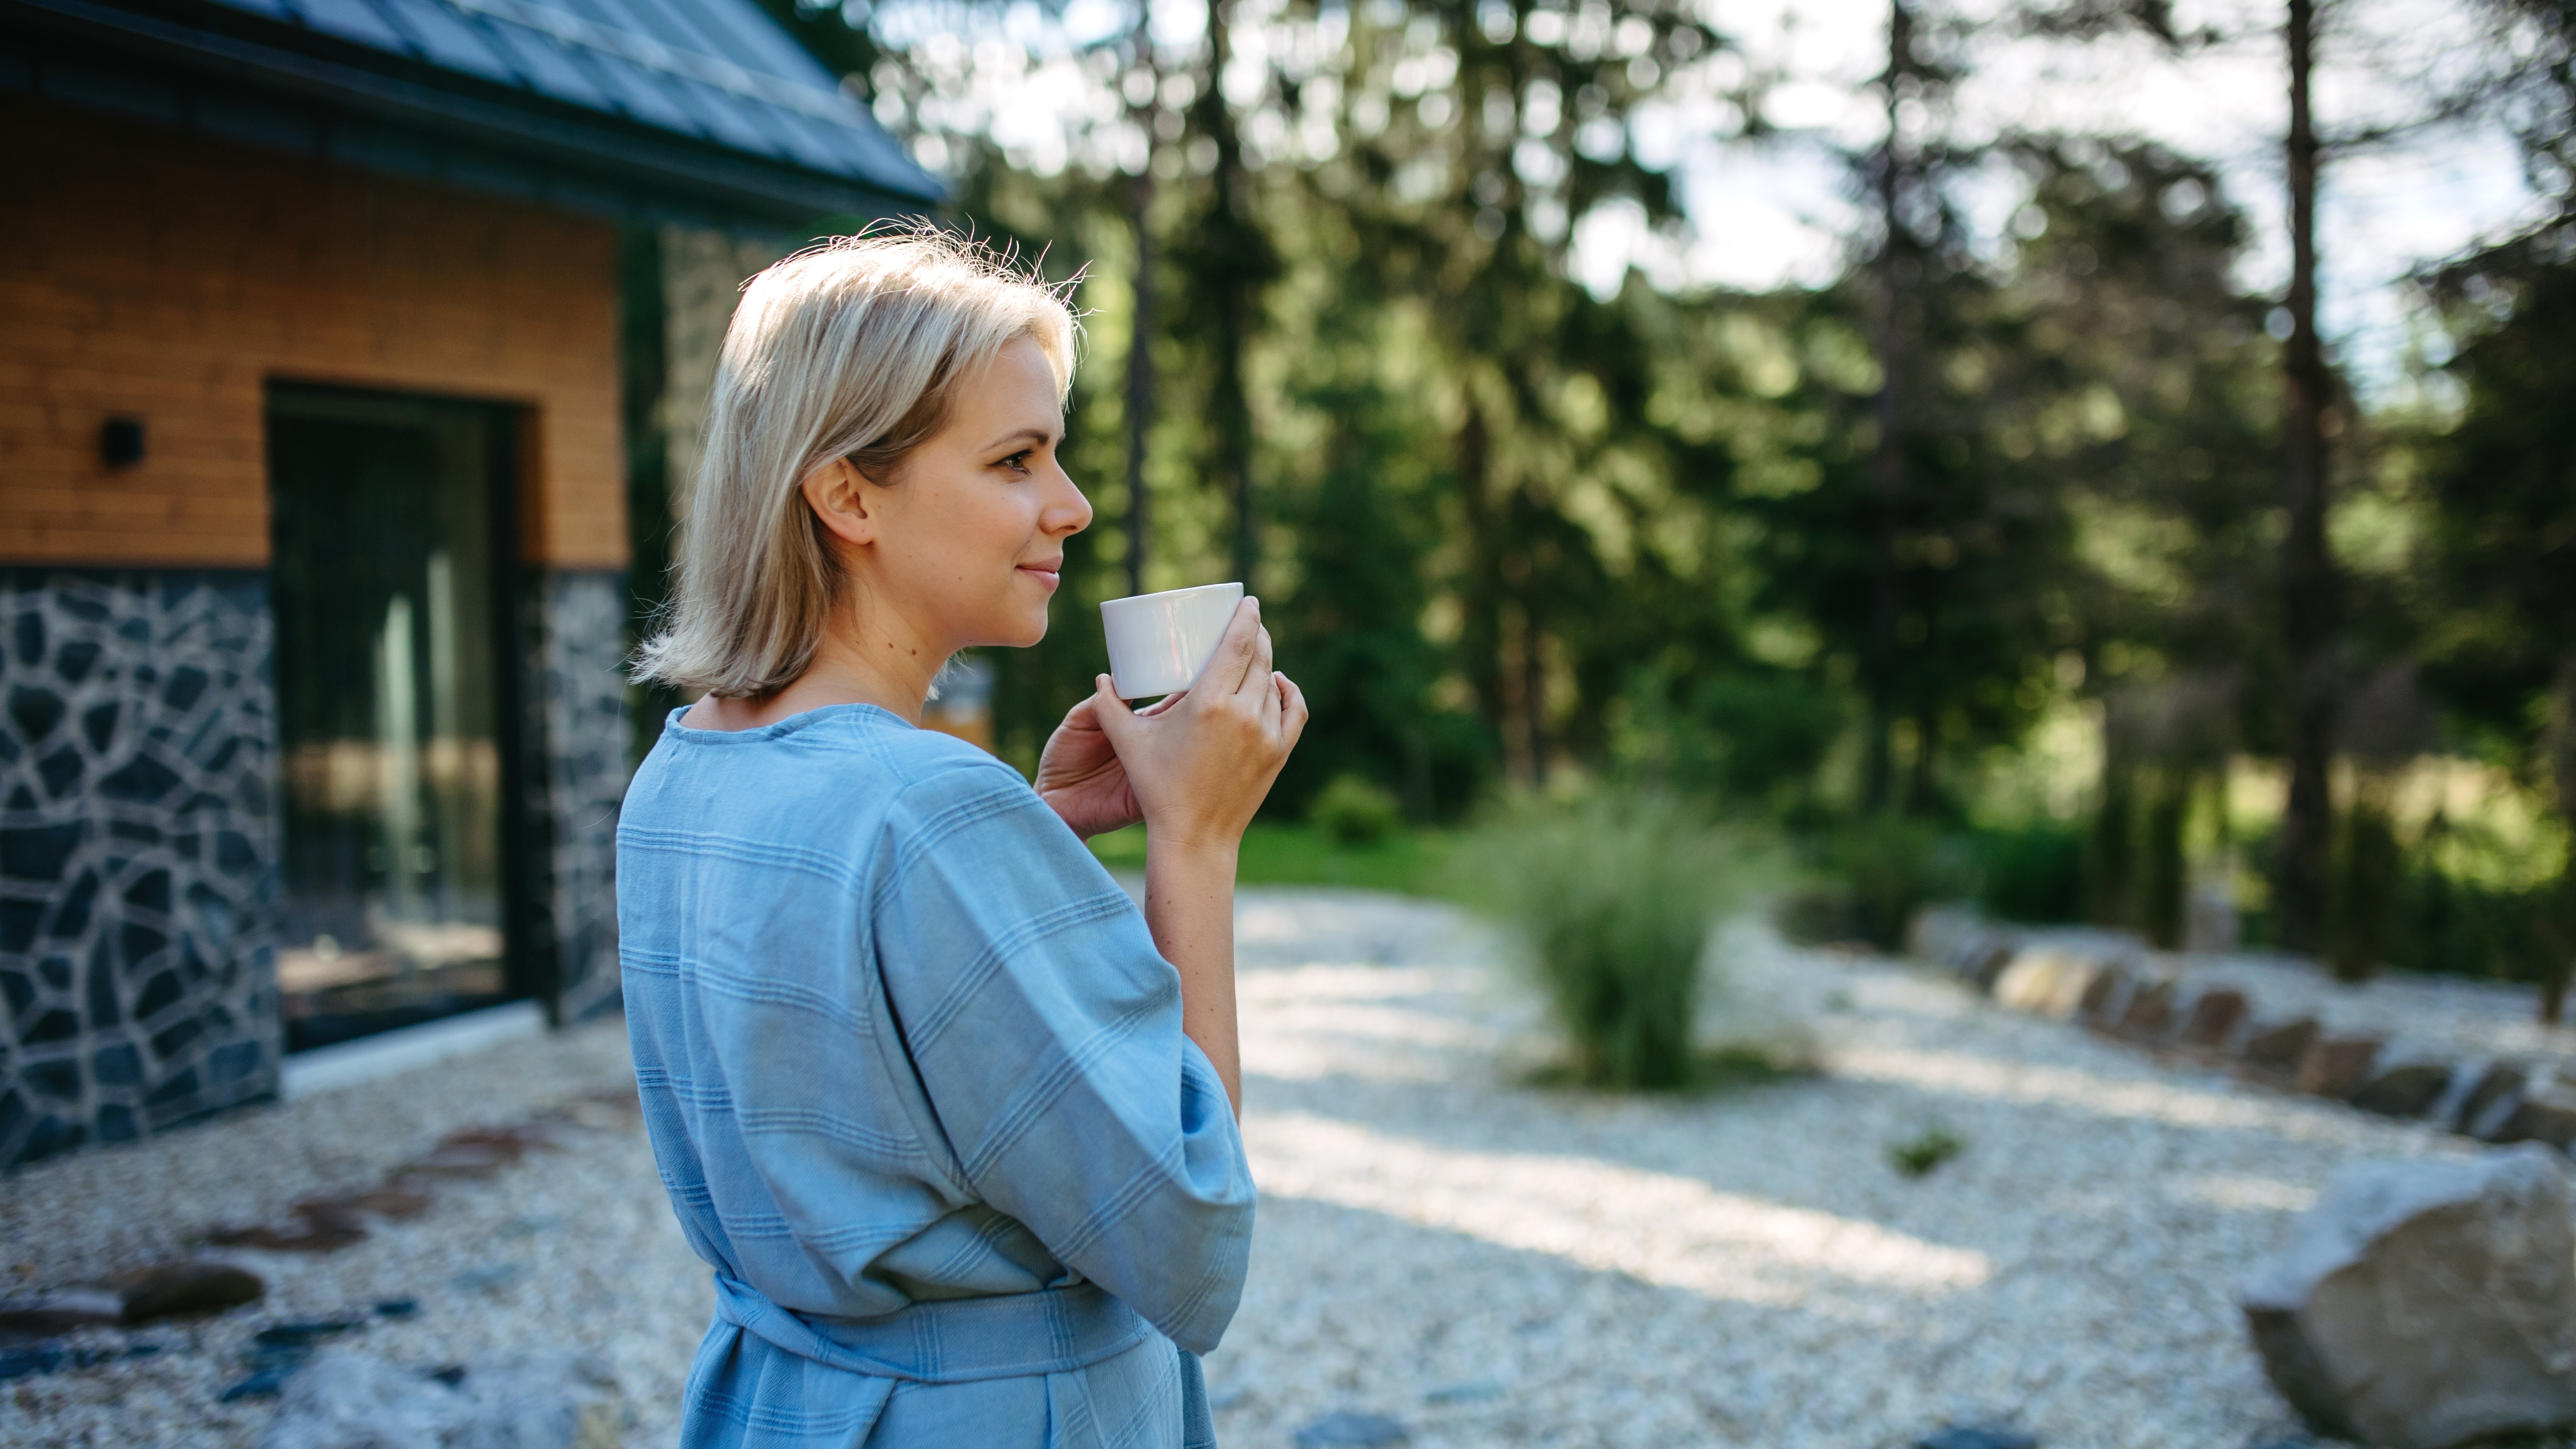 A woman enjoying a cup of coffee in a garden outside her home | Source: Shutterstock